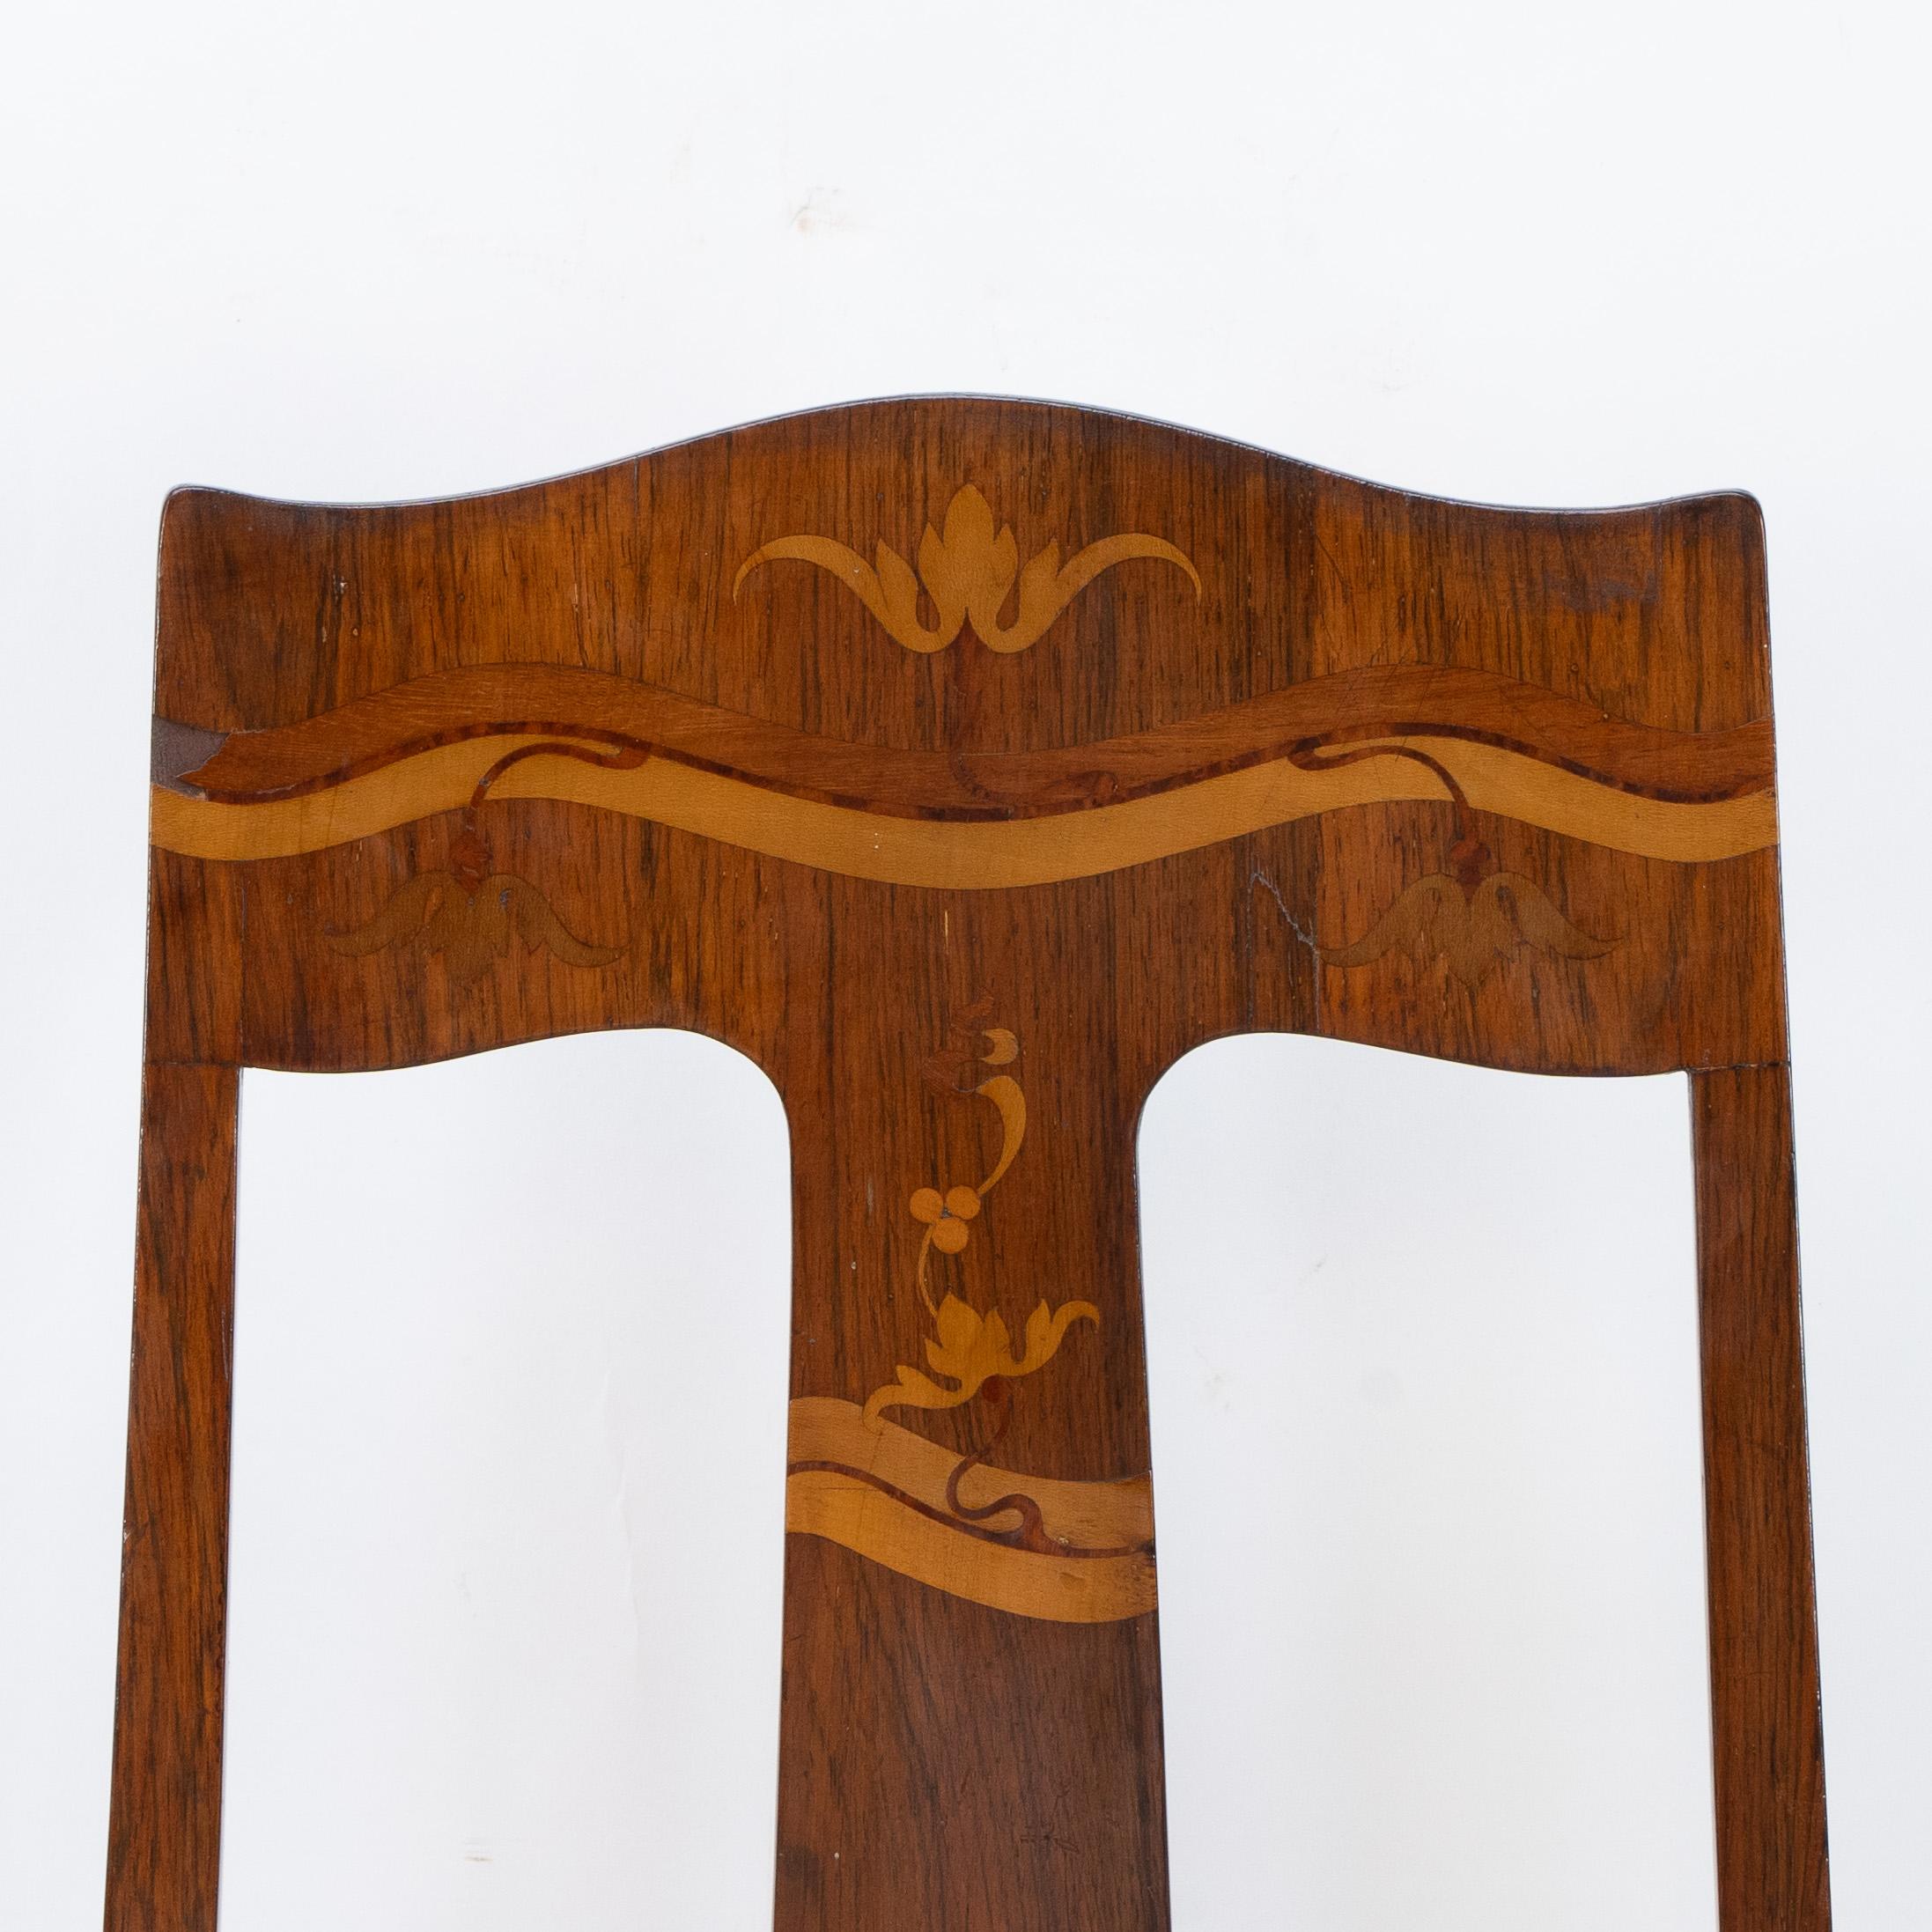 English Jas Shoolbred. Arts & Crafts Mahogany Rosewood Chair With stylized Floral Inlay For Sale